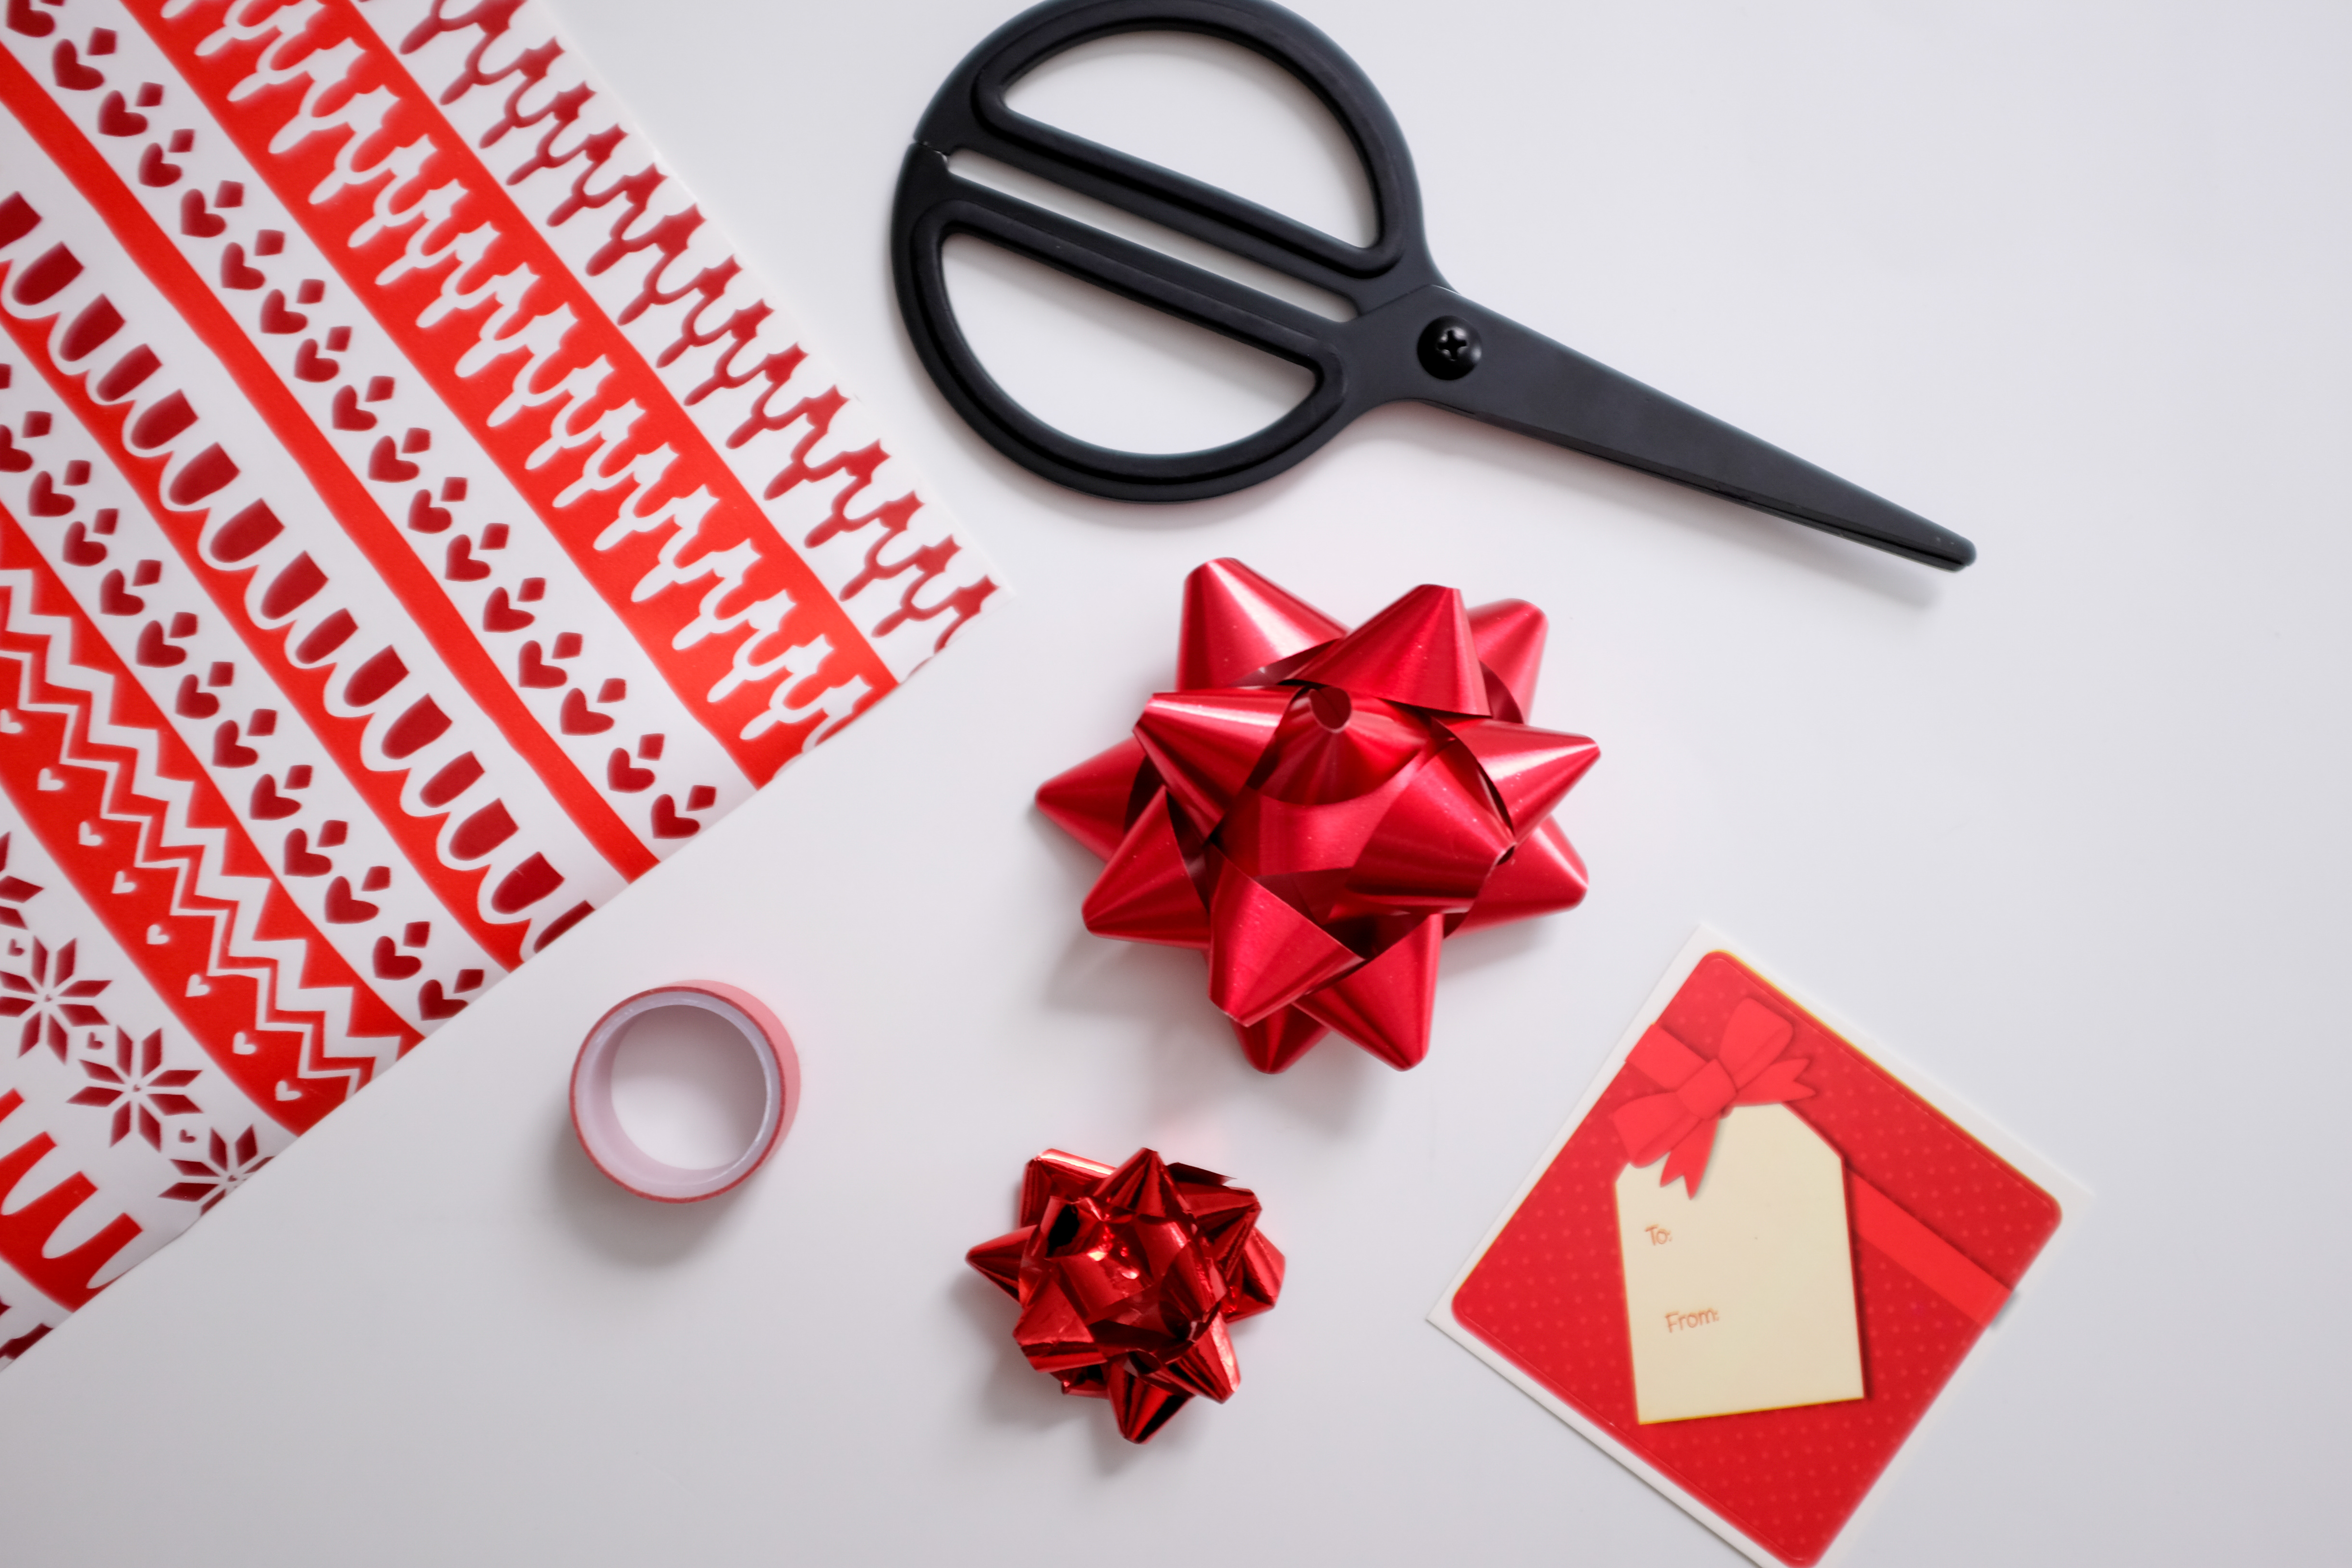 A flatlay of holiday gift wrap materials: gift wrap, scissors, bows, tape, and a to/from tag